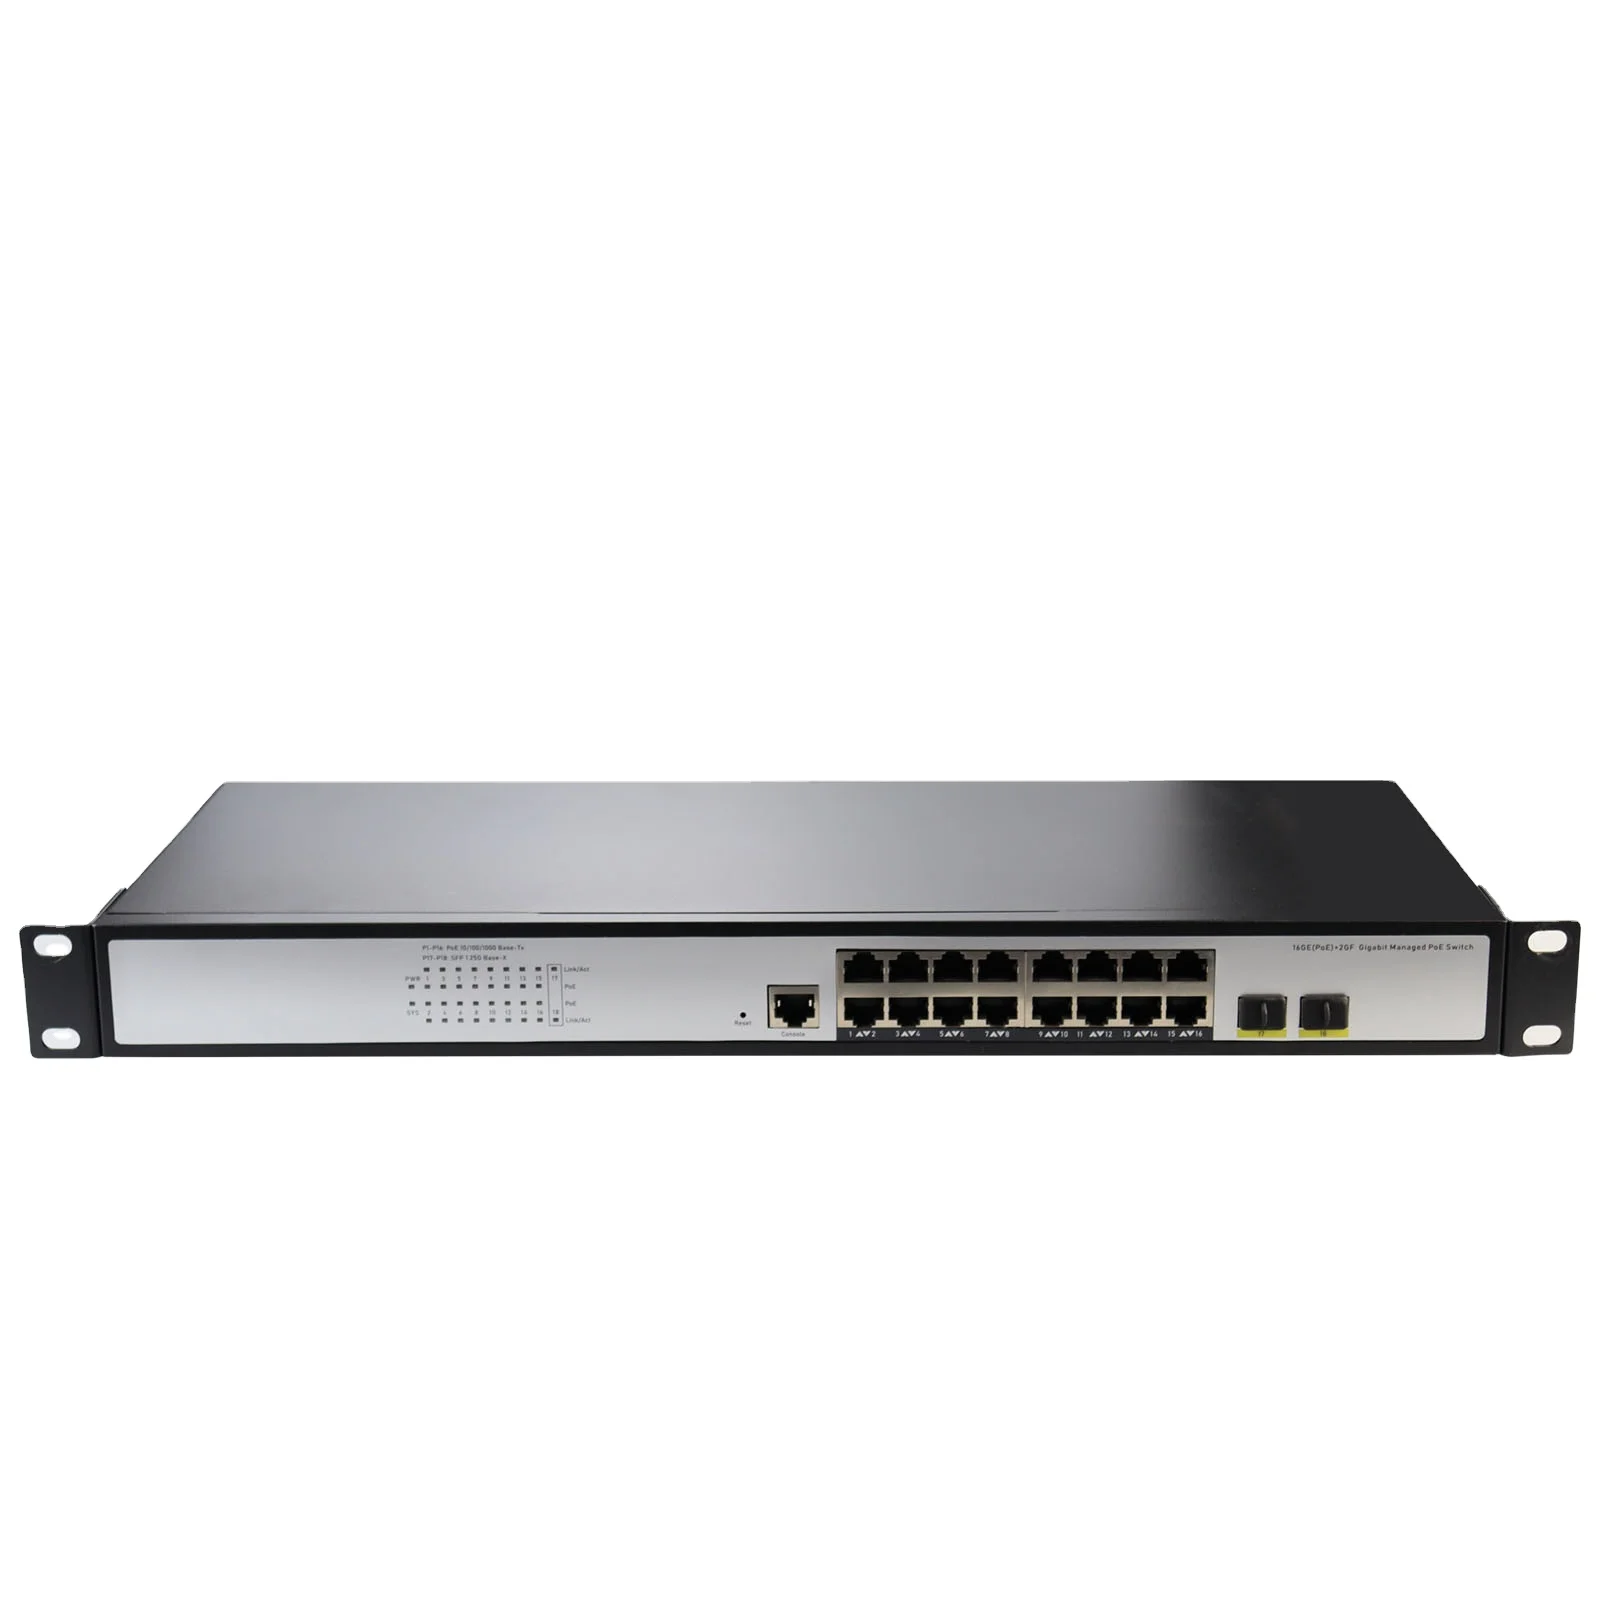 

Commercial L2 Managed PoE Switch 16-Port 10 100 1000T 802.3at PoE To 2-Port 100 1000X SFP Fiber